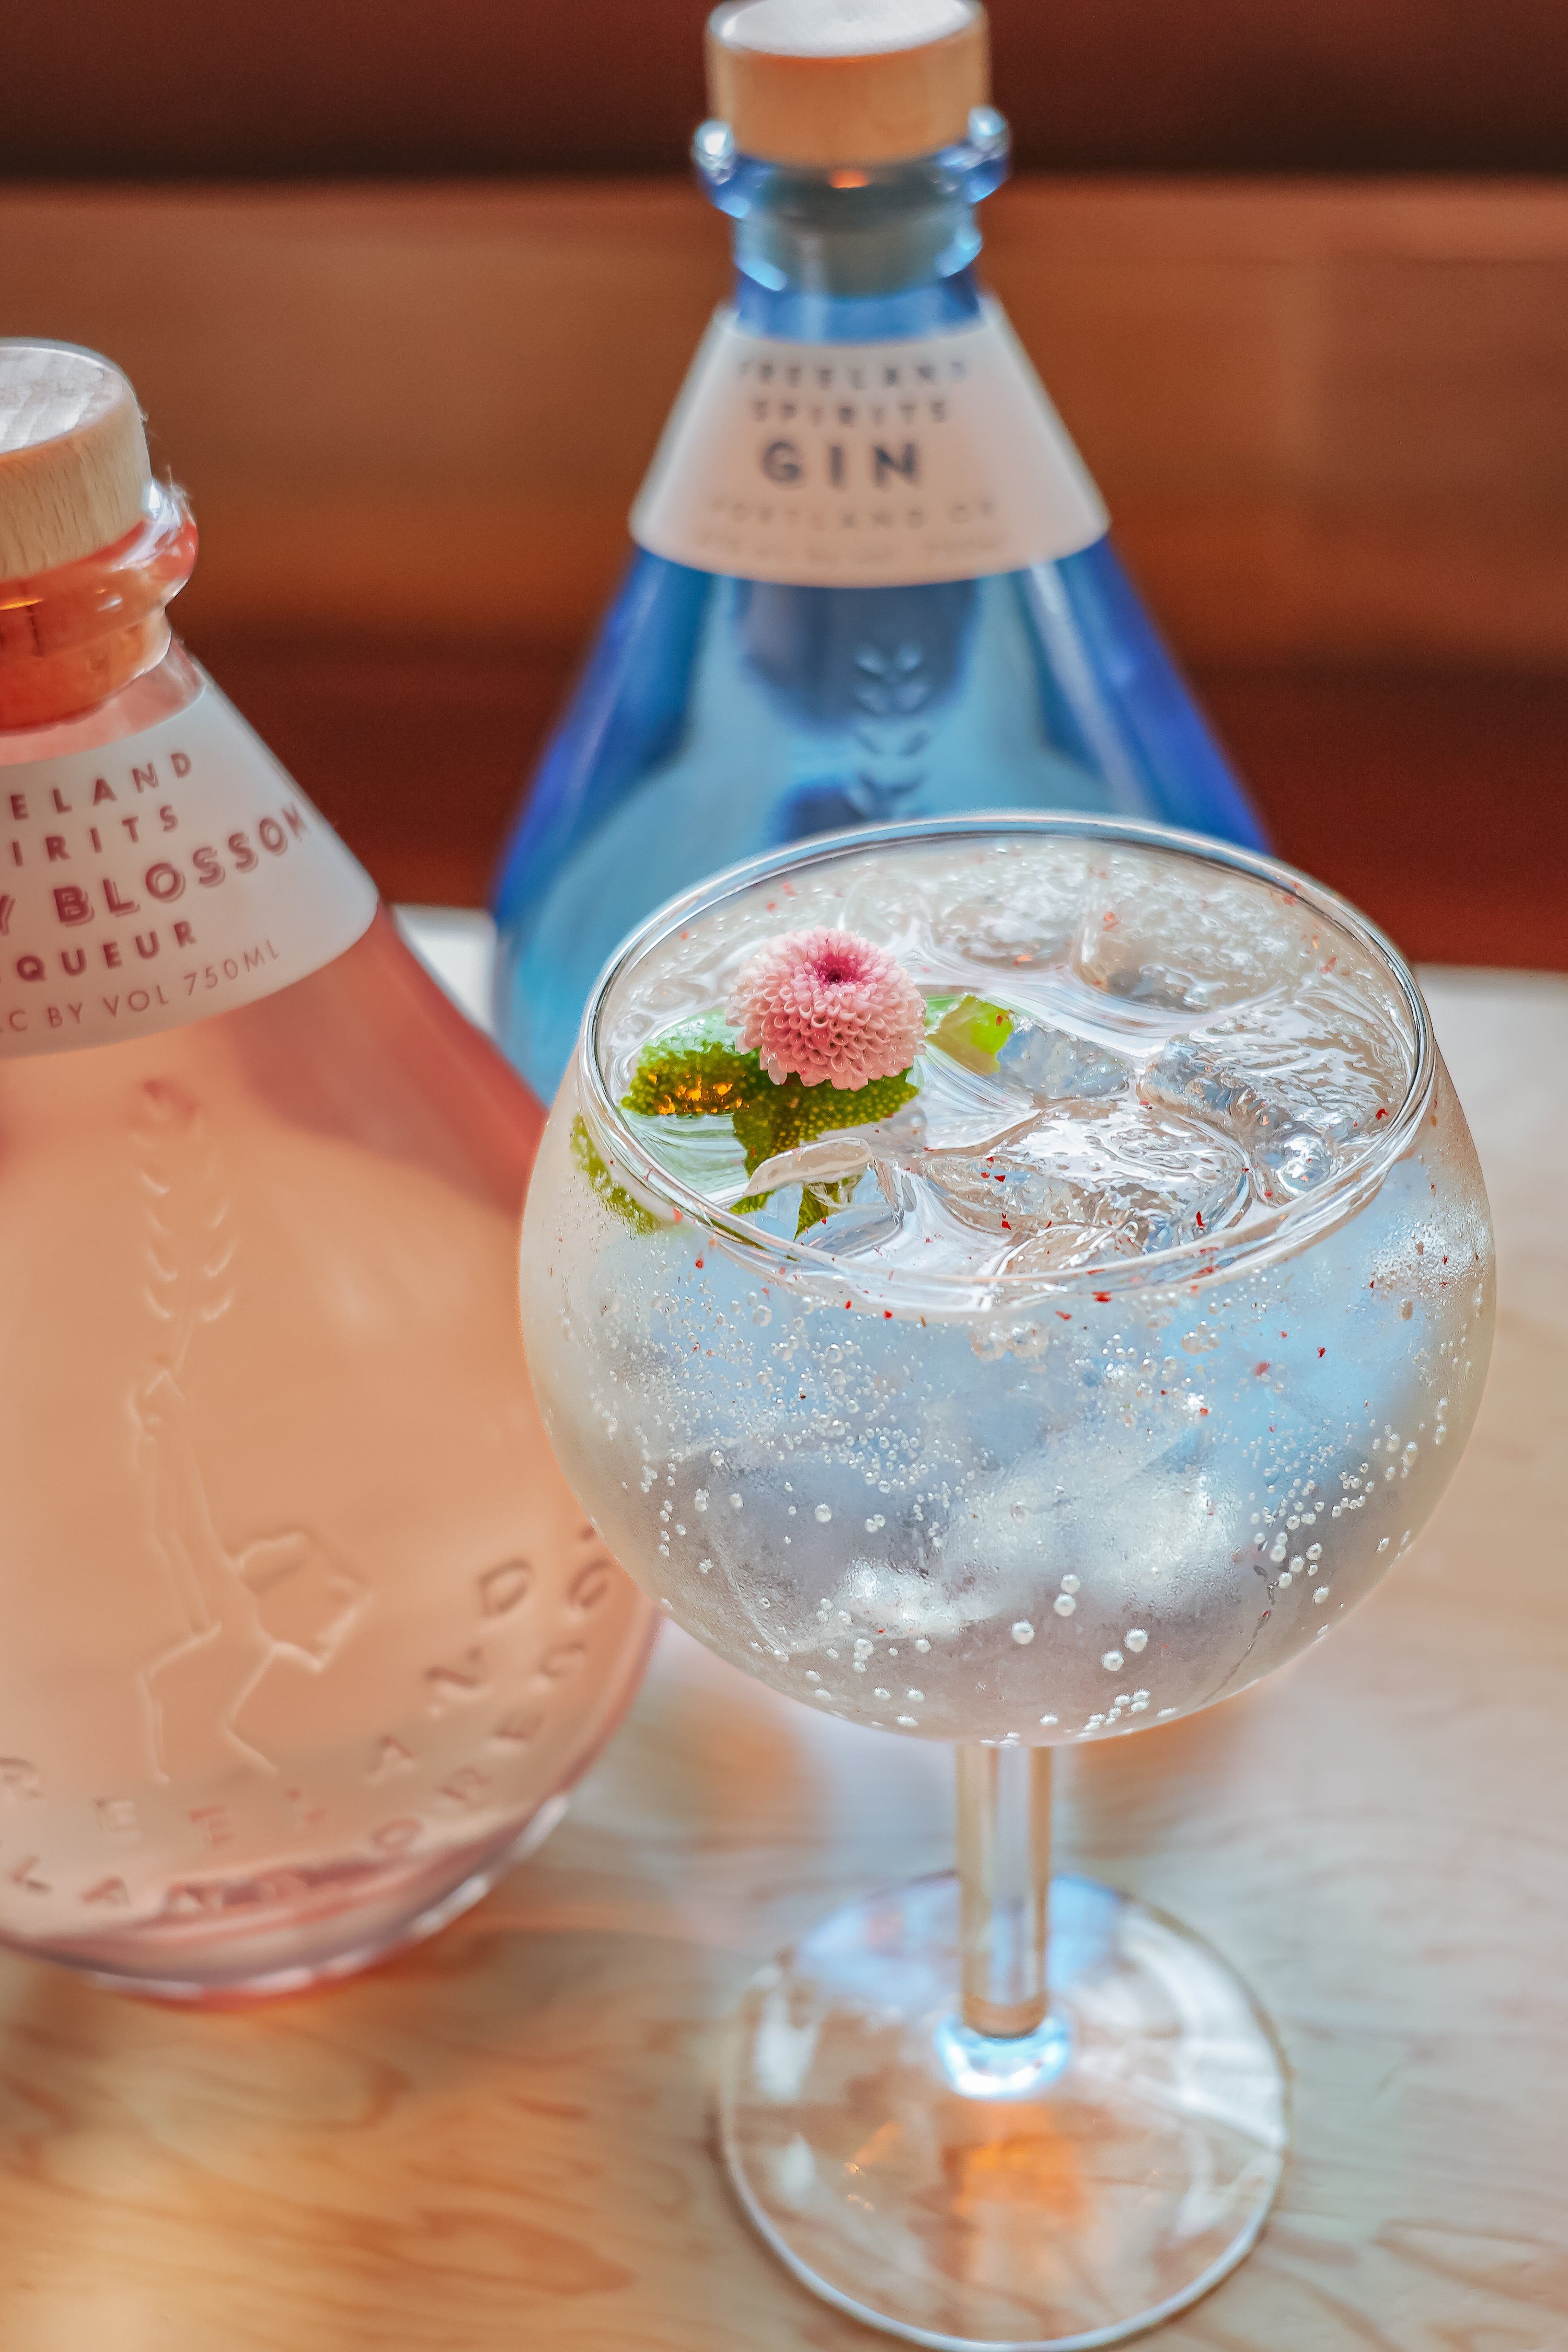 Freeland Cherry Blossom Liqueur and Freeland Gin bottles with a Springtime Gin & Tonic cocktail garnished with a small pink flower